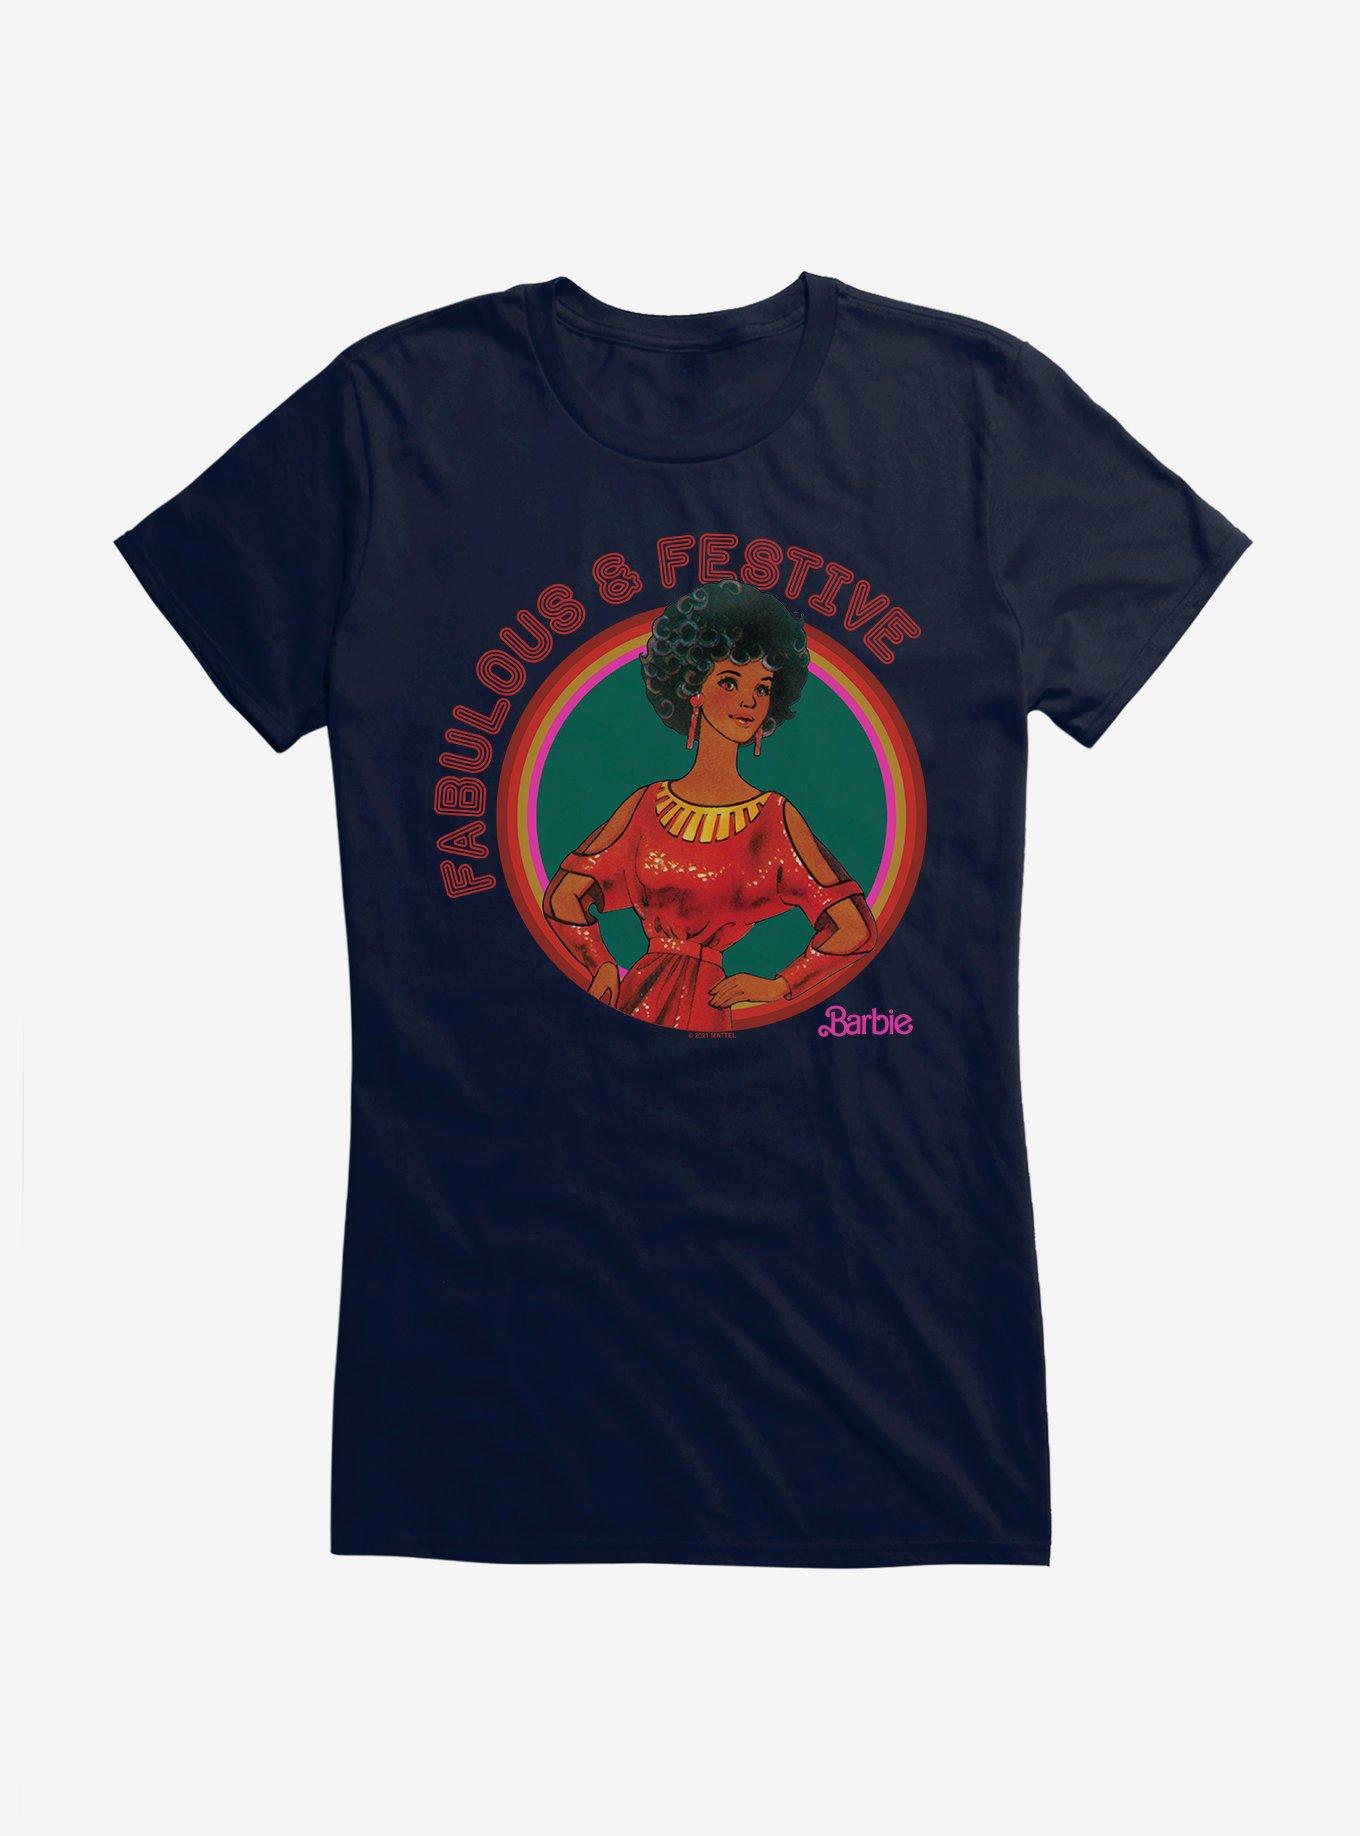 Barbie Holiday Fab And Festive Girls T-Shirt, NAVY, hi-res